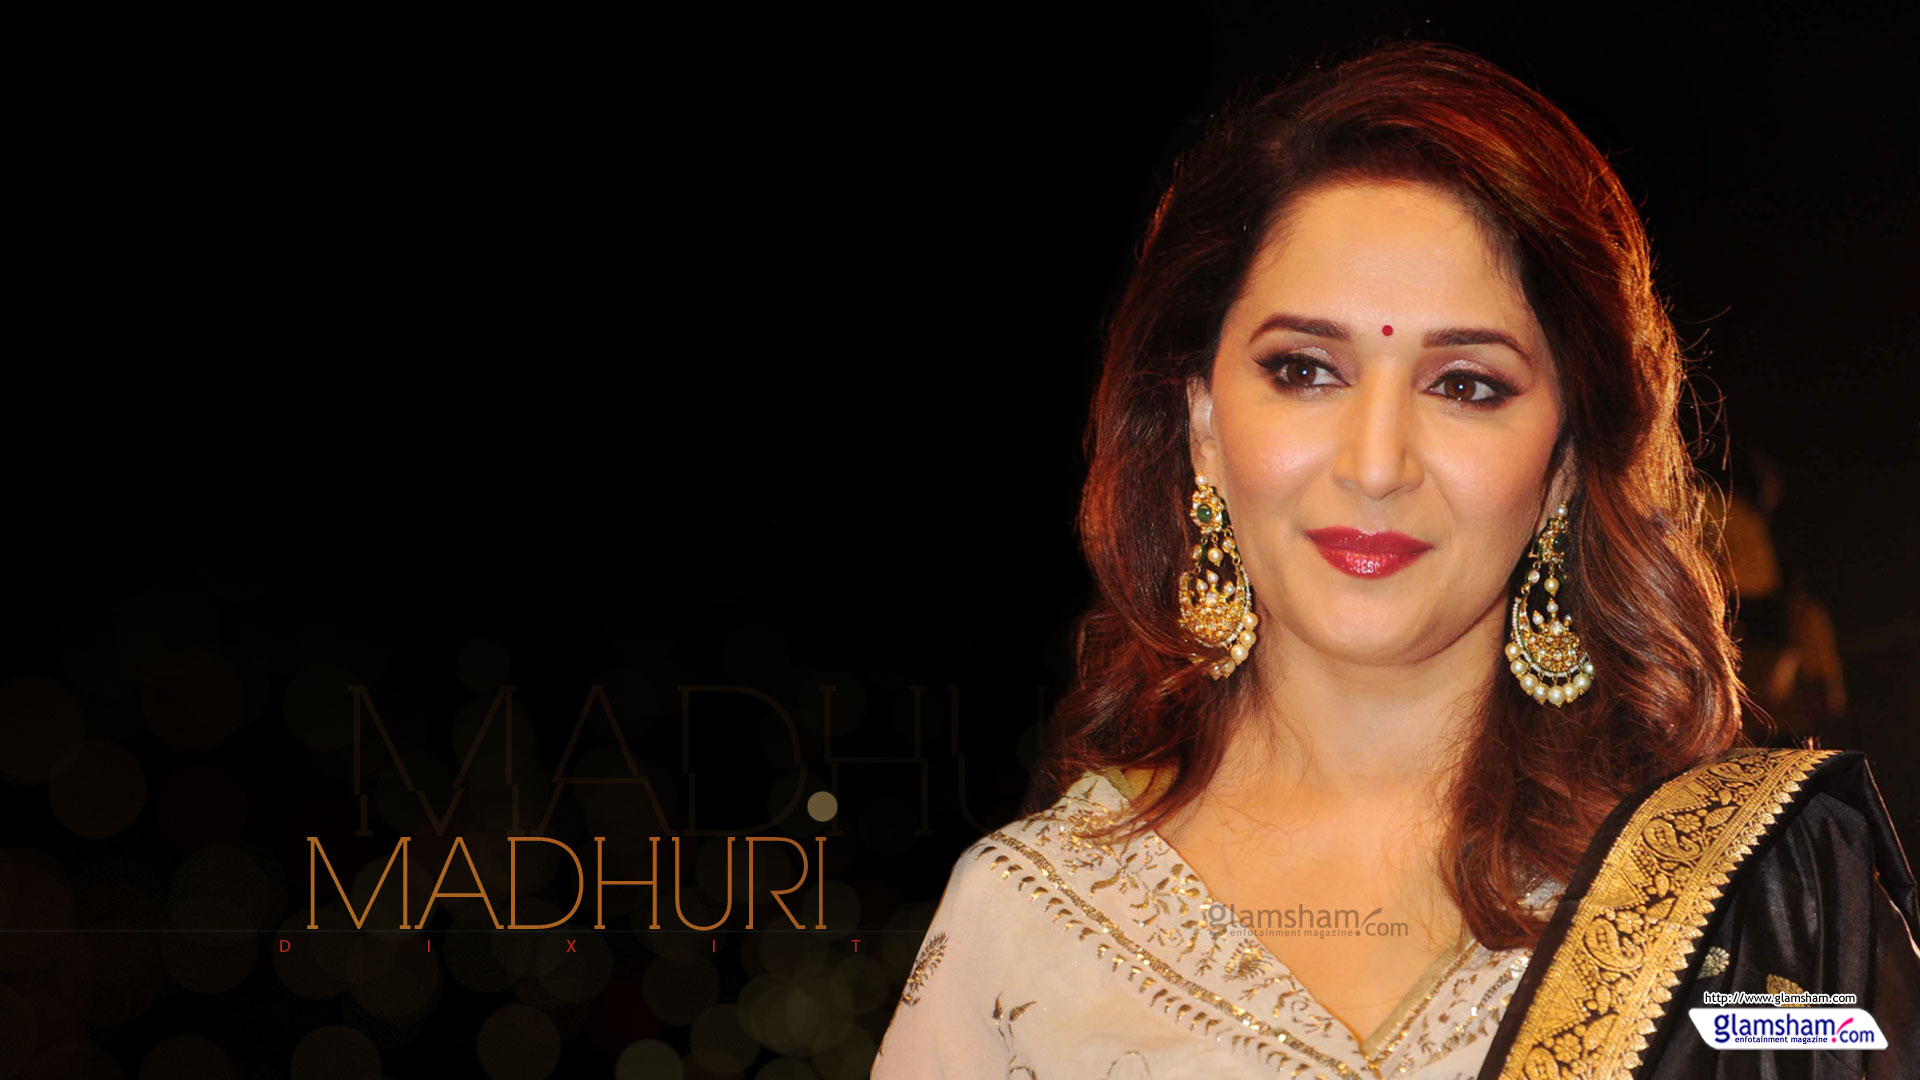 Madhuri Dixit Wallpapers High Resolution And Quality - Madhuri Dixit - HD Wallpaper 